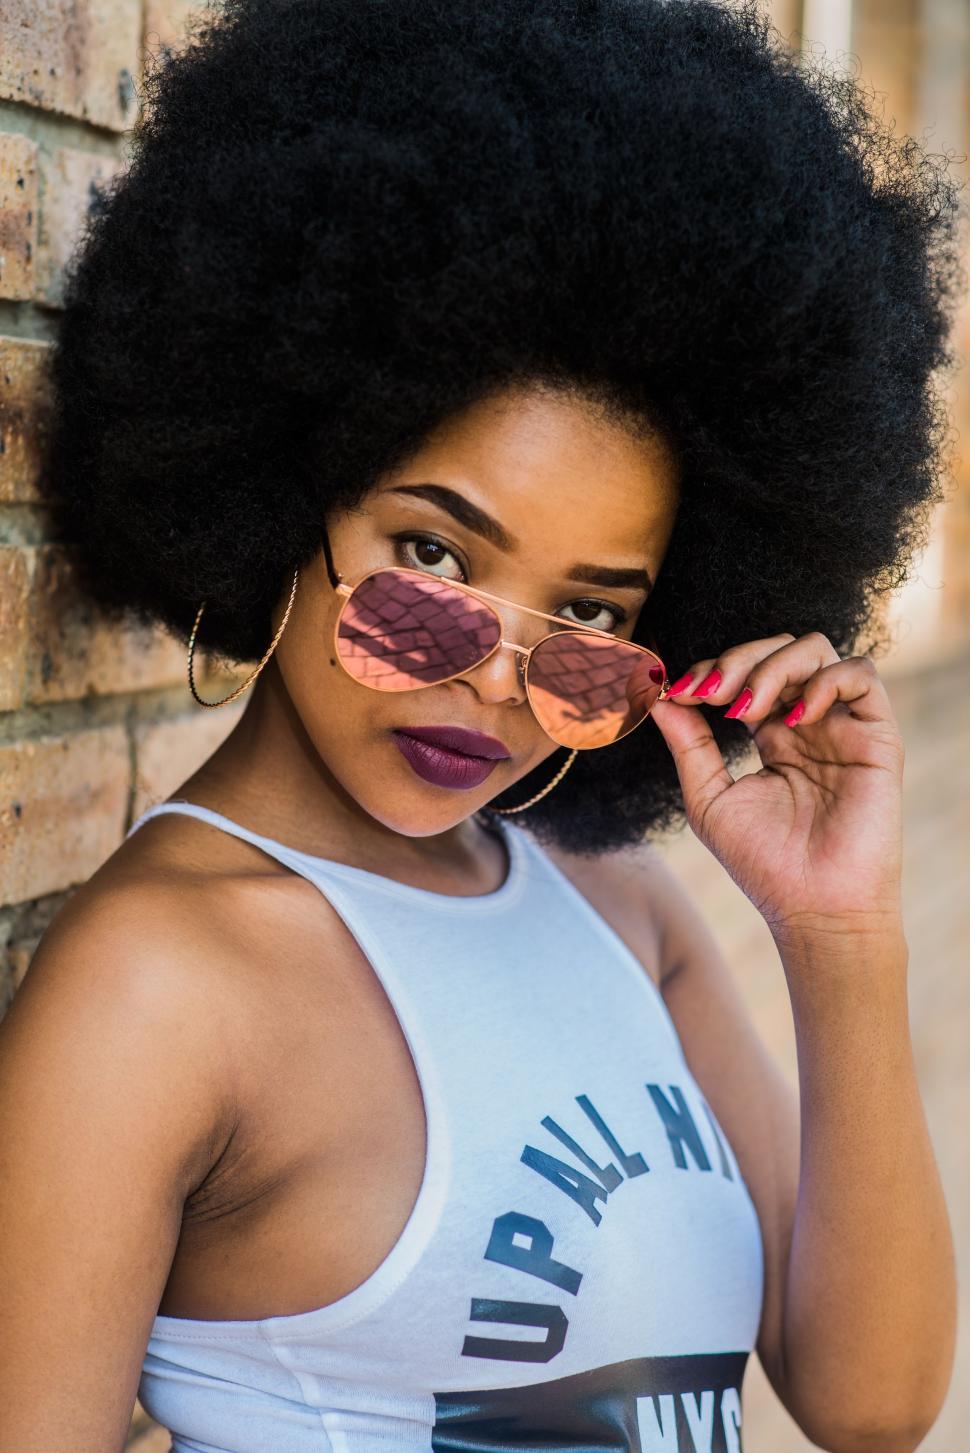 Free Image of Woman Wearing Sunglasses and Tank Top 